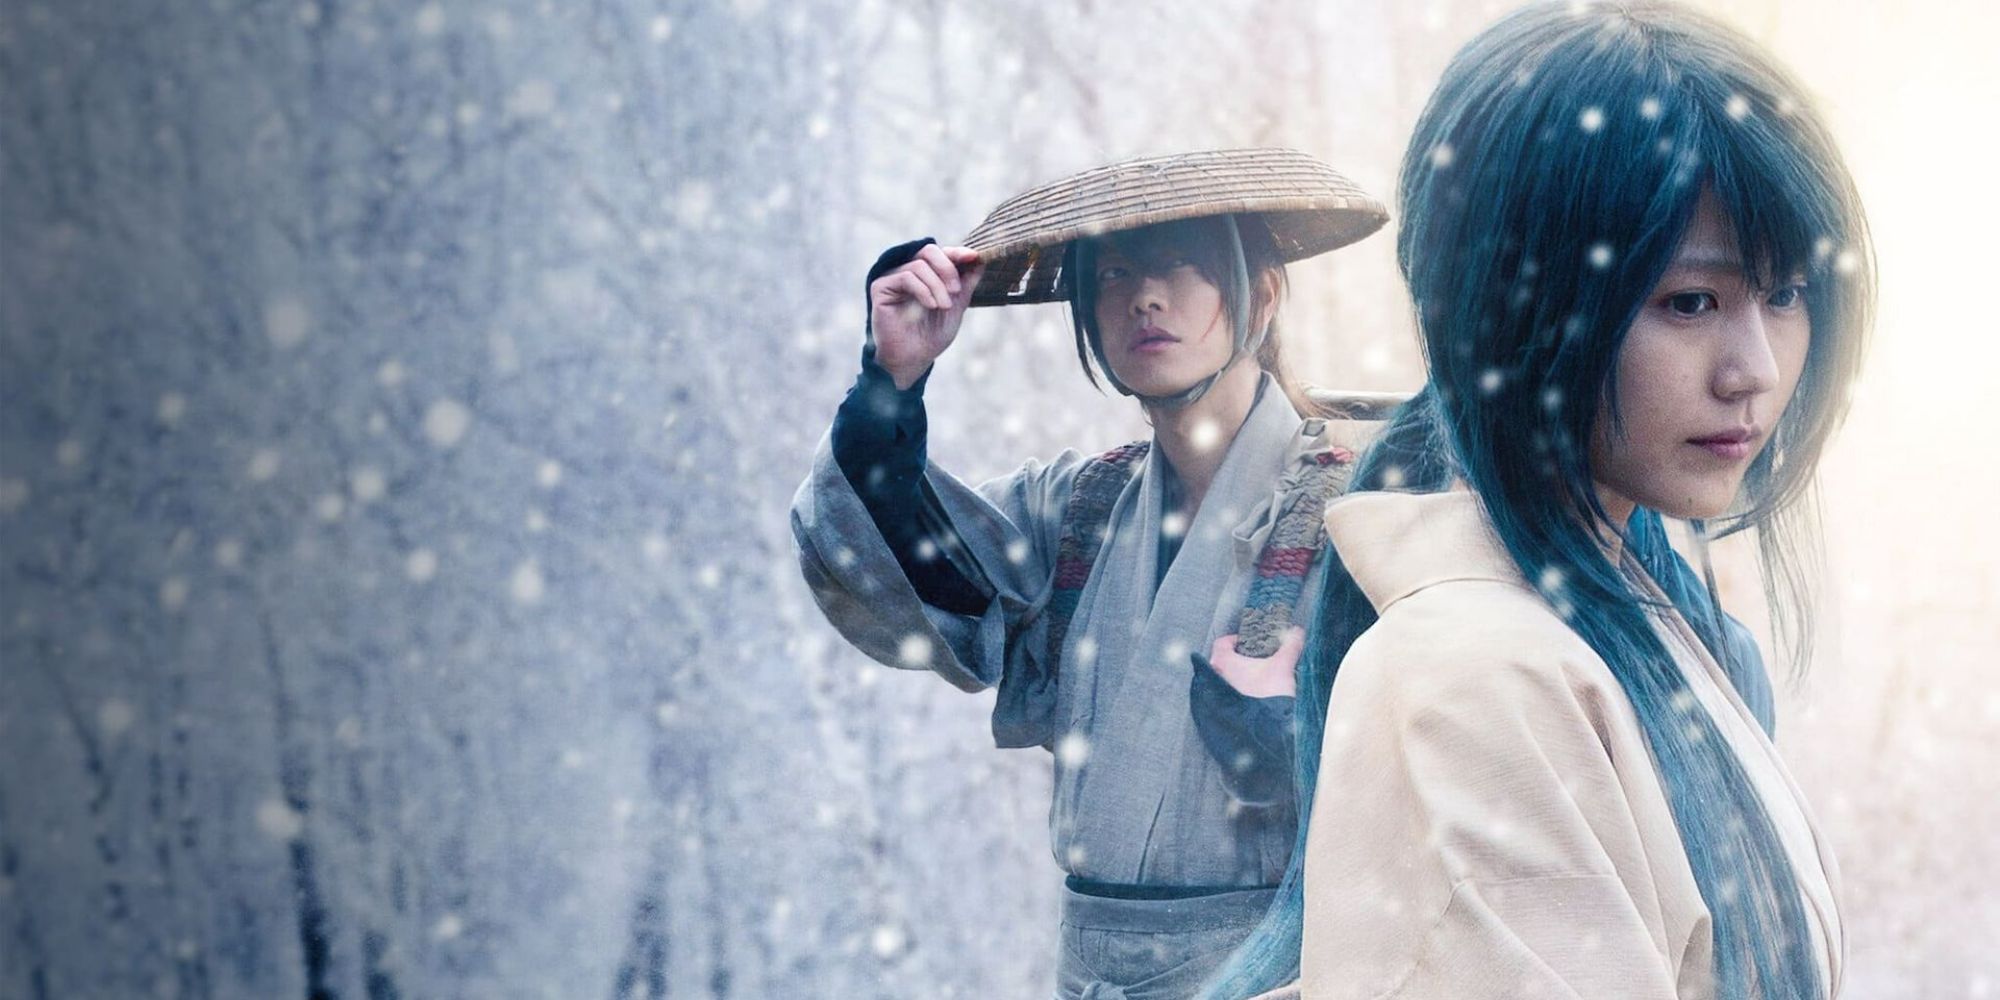 A man and woman stand in falling snow in Rurouni Kenshin Final Chapter Part II - The Beginning